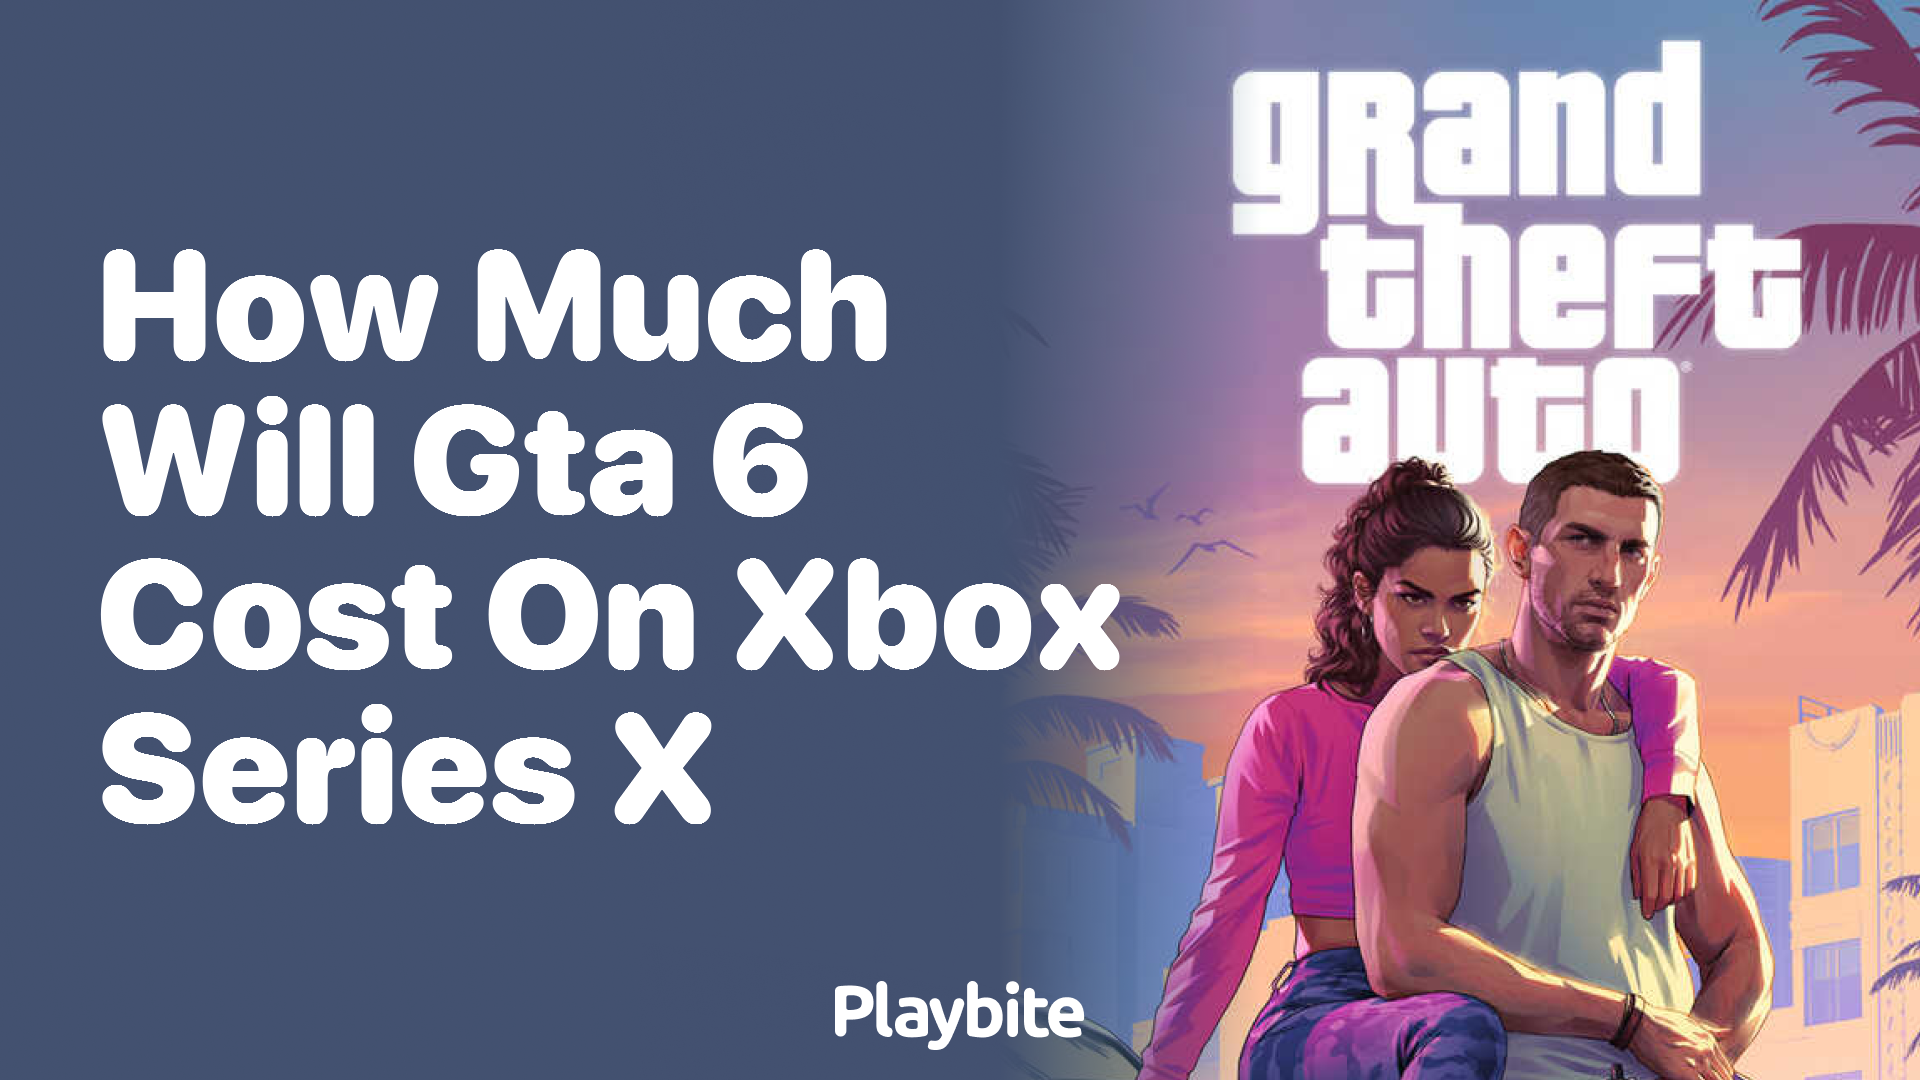 How much will GTA 6 cost on Xbox Series X?